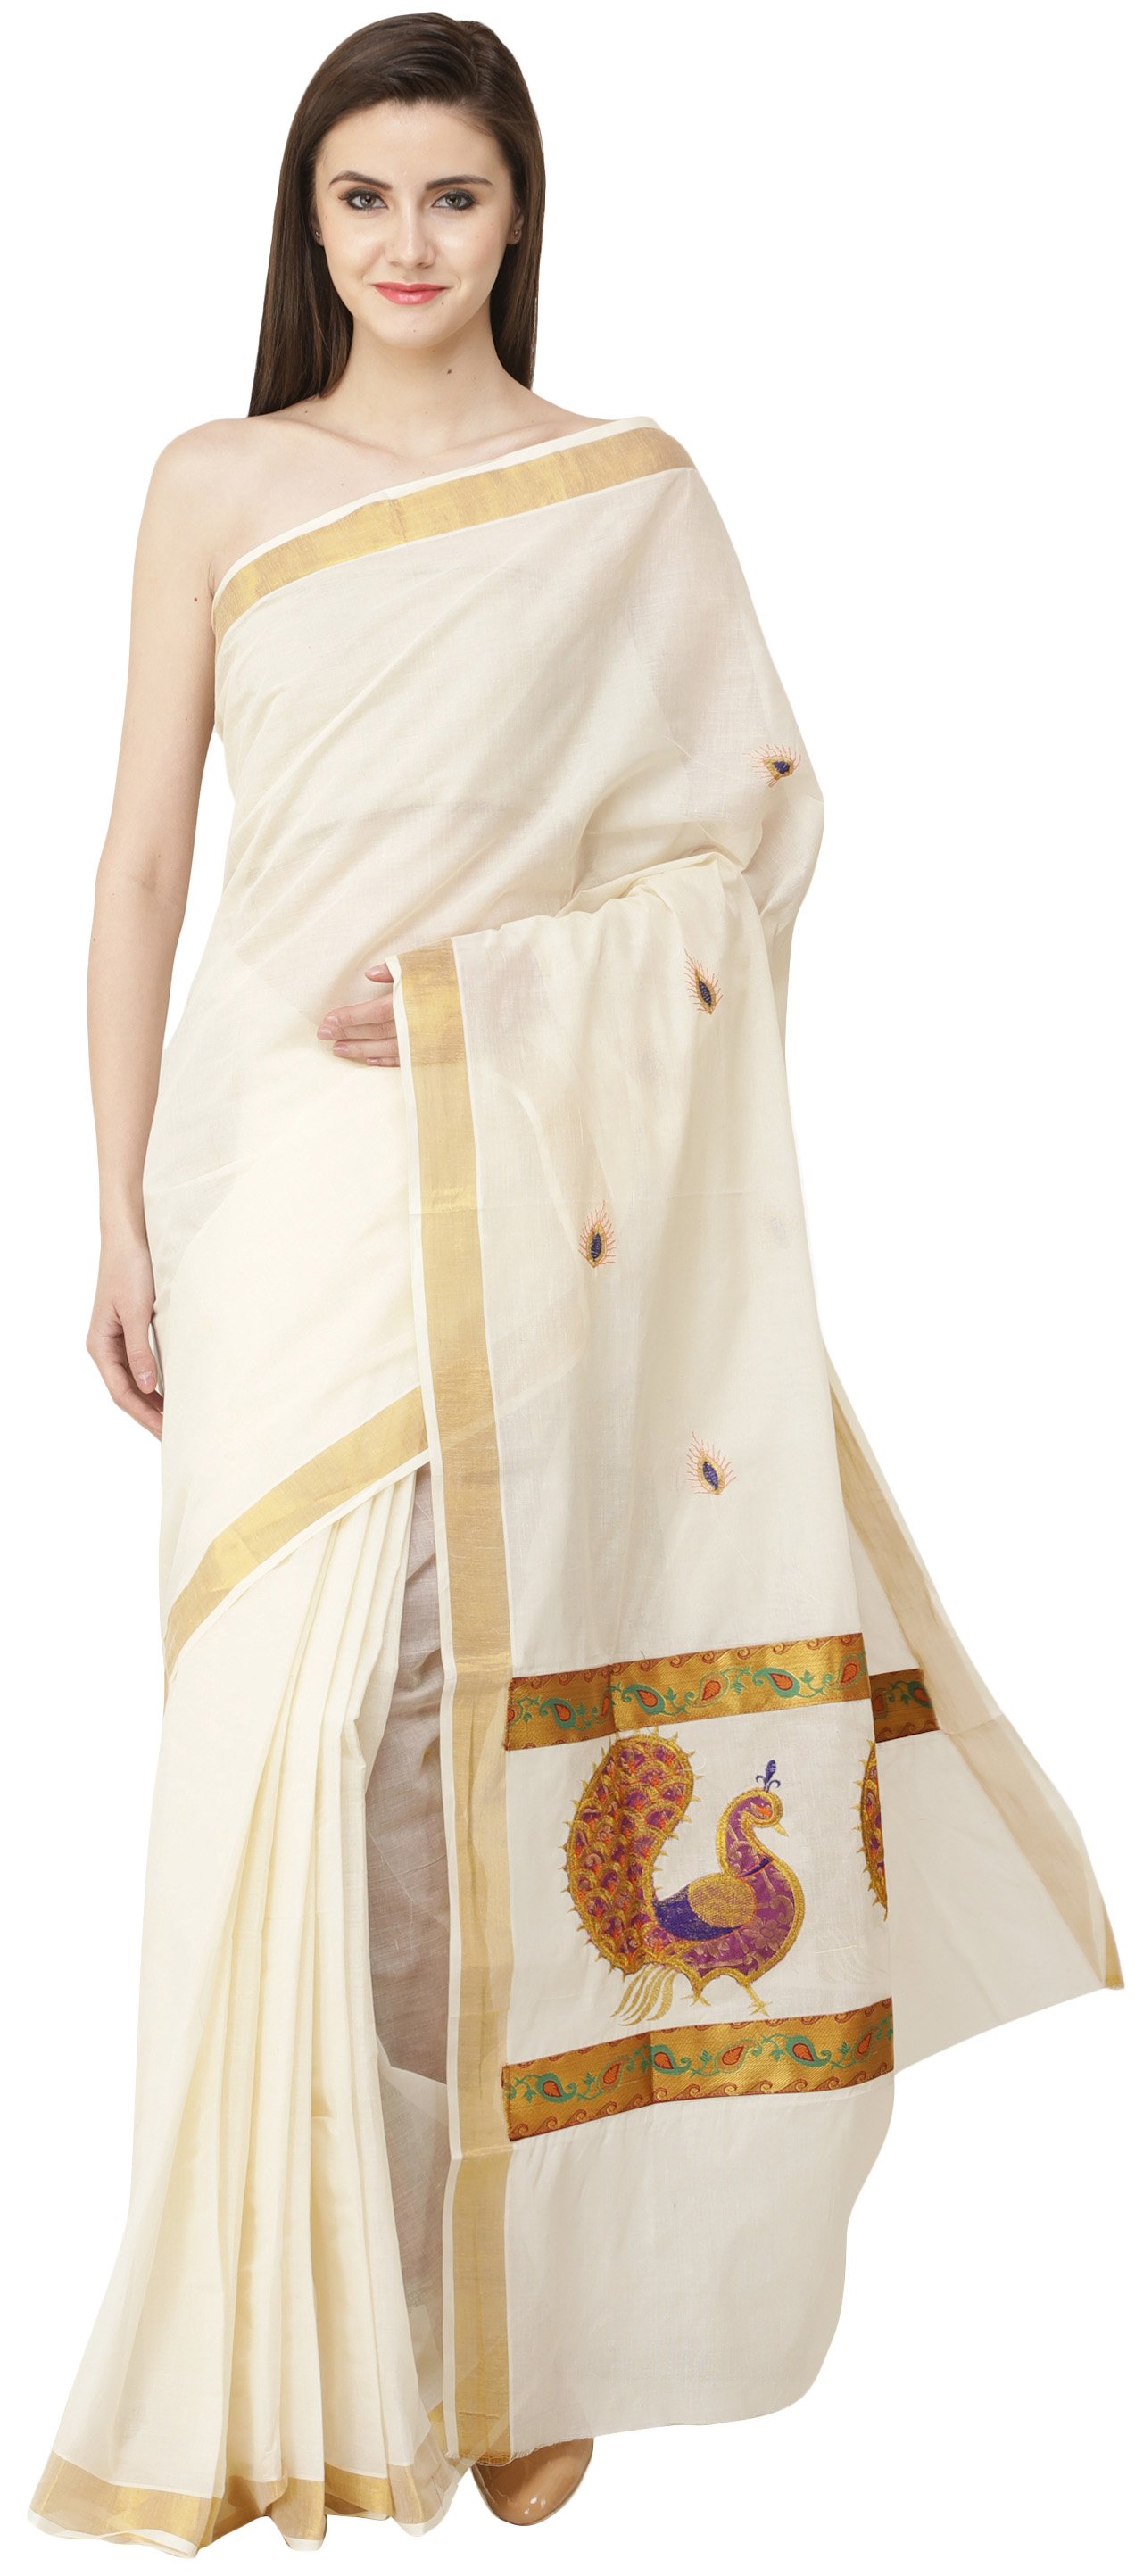 Ivory Kasavu Sari From Kerala With Embroidered Peacocks And Golden Border 